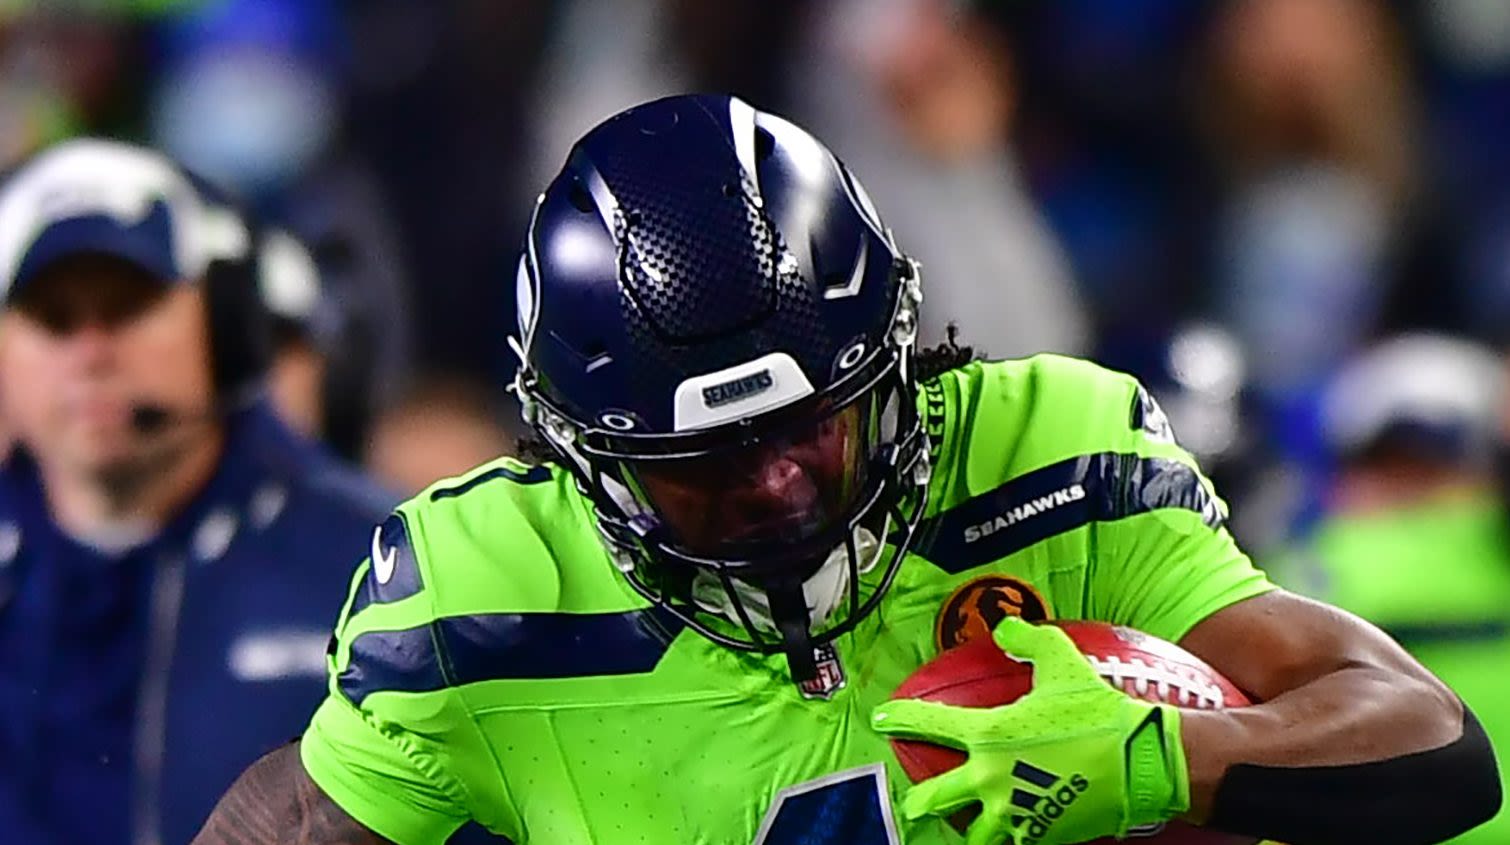 Underperforming Seahawks Receiver Most Likely Player to Be Cut: Analyst